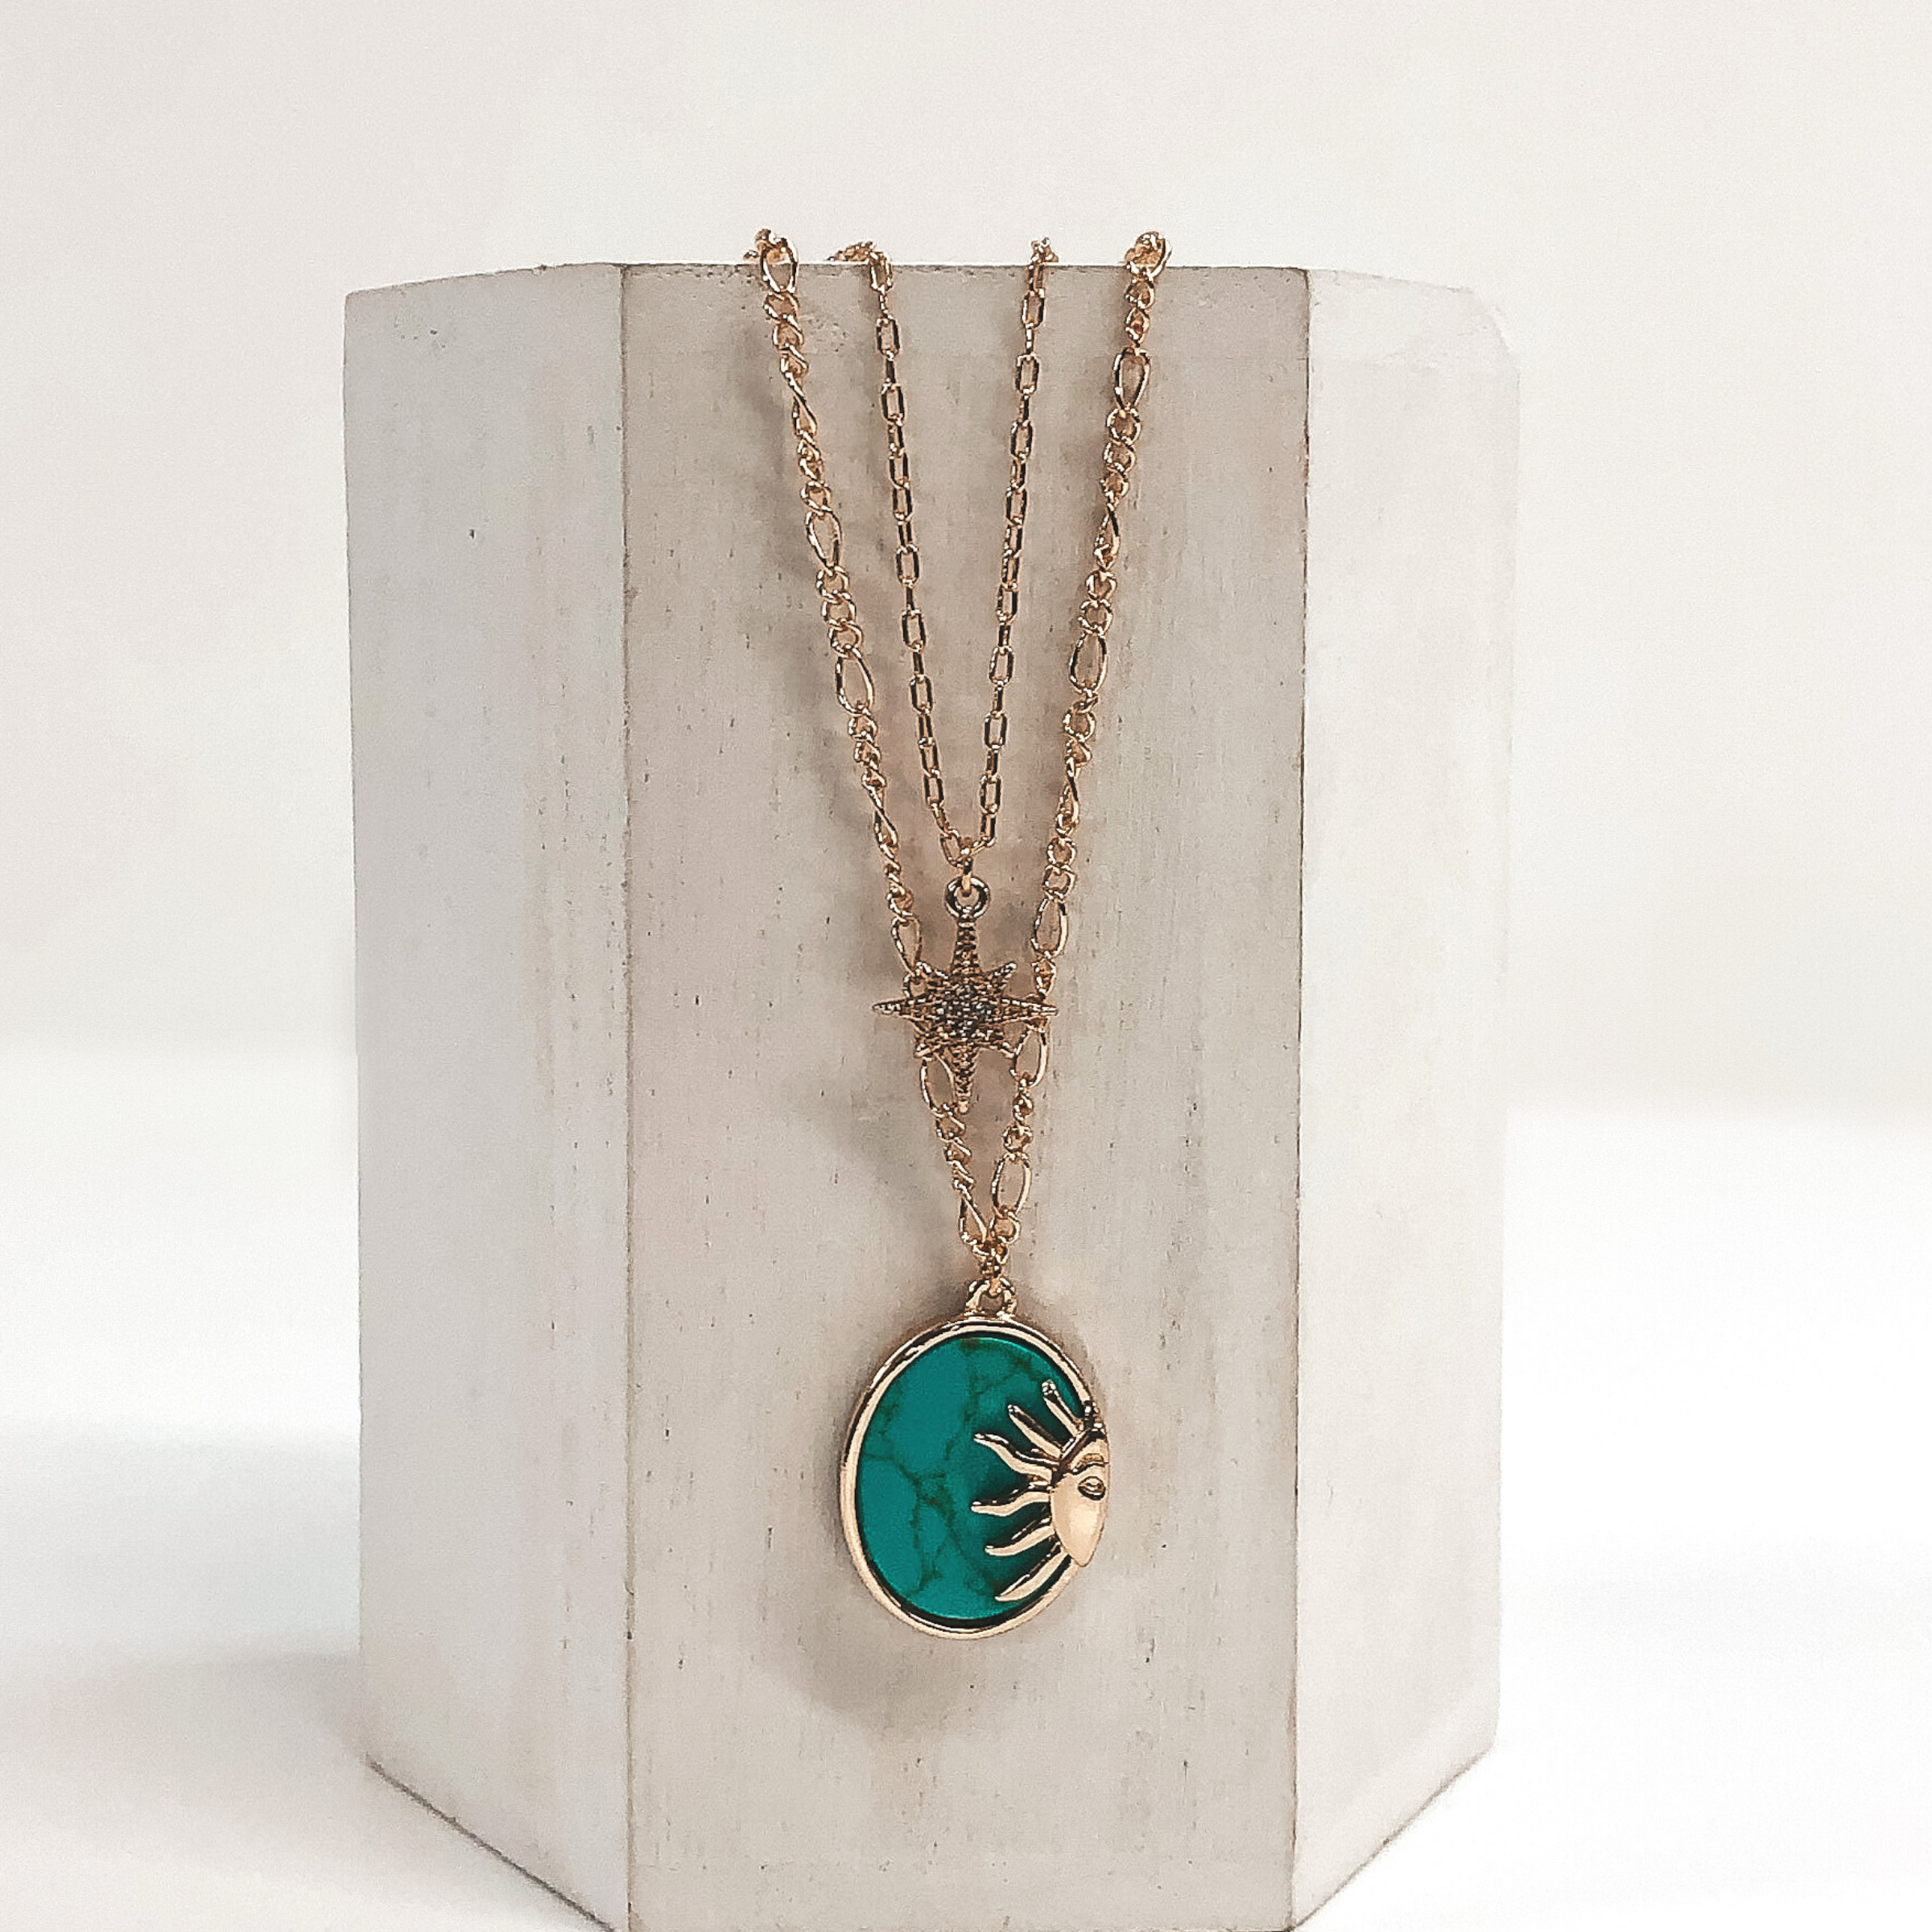 Double layered chain necklace in gold. The shorter strand has a gold star pendant with a center clear crystal and the longer strand has an oval turquoise stone pendant with a half sun gold charm. This necklace is pictured hanging on a white block on a white background.